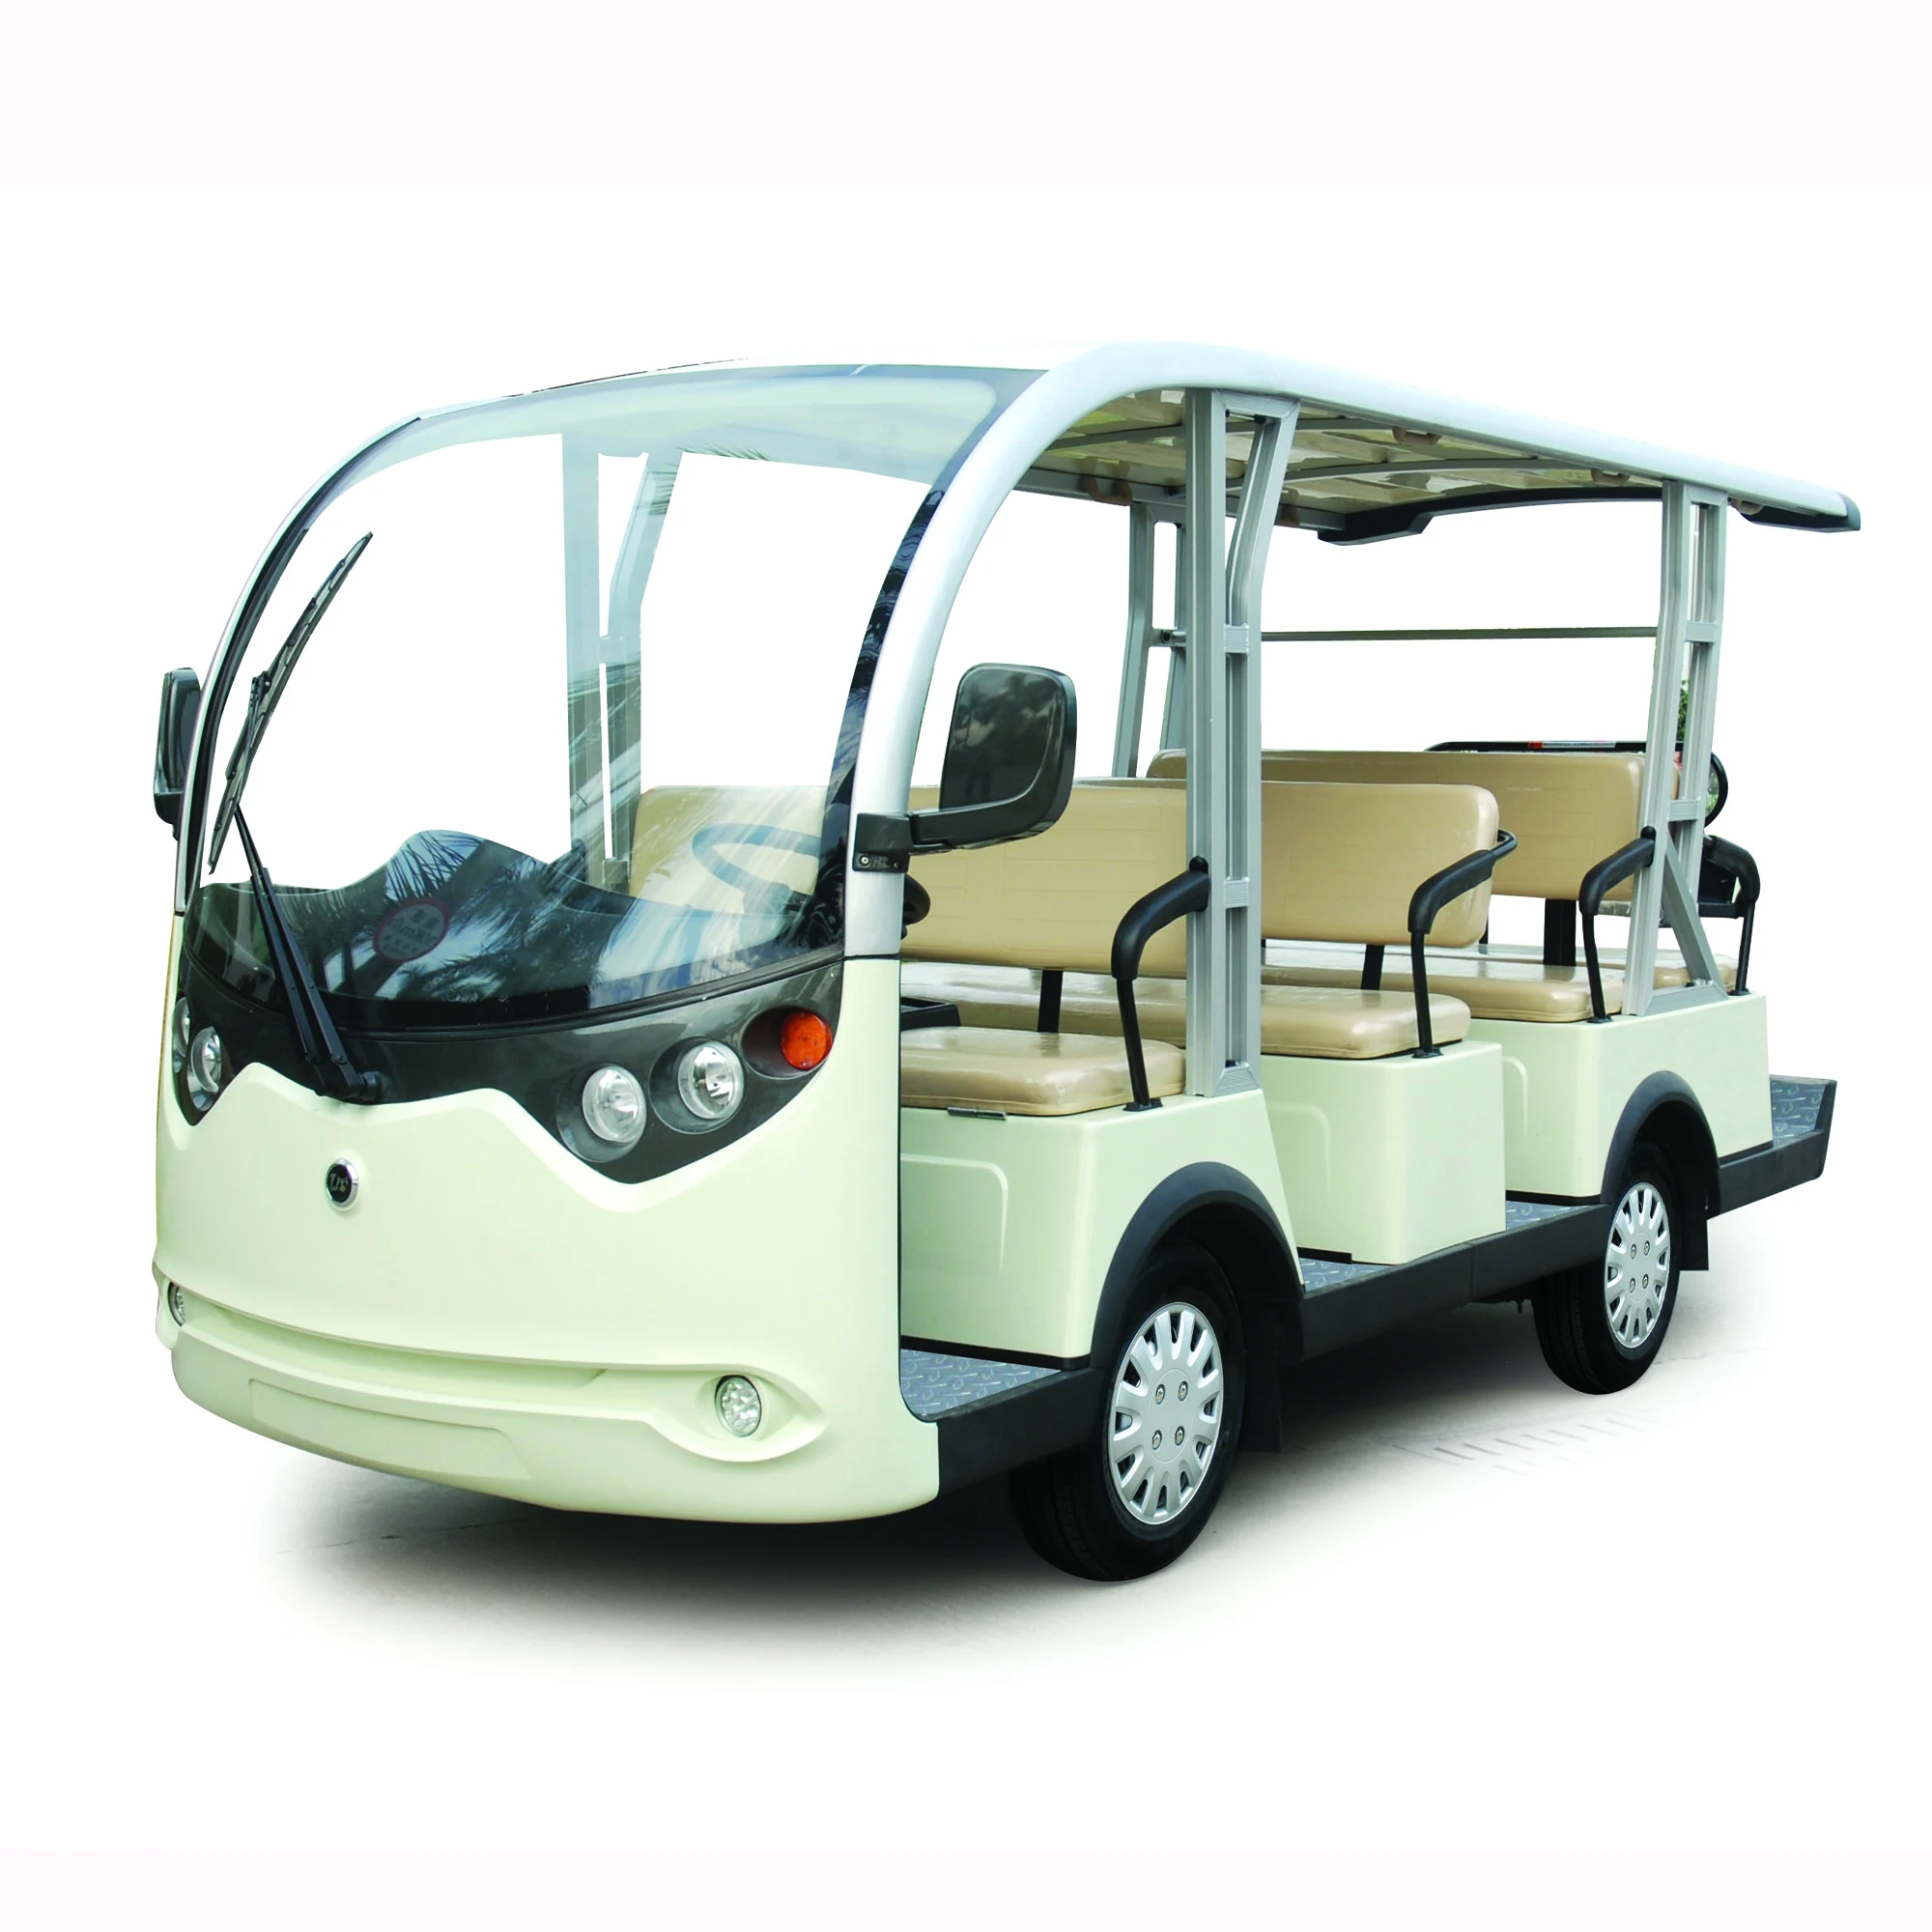 eleven(11) seater electric sightseeing car/electric shuttle